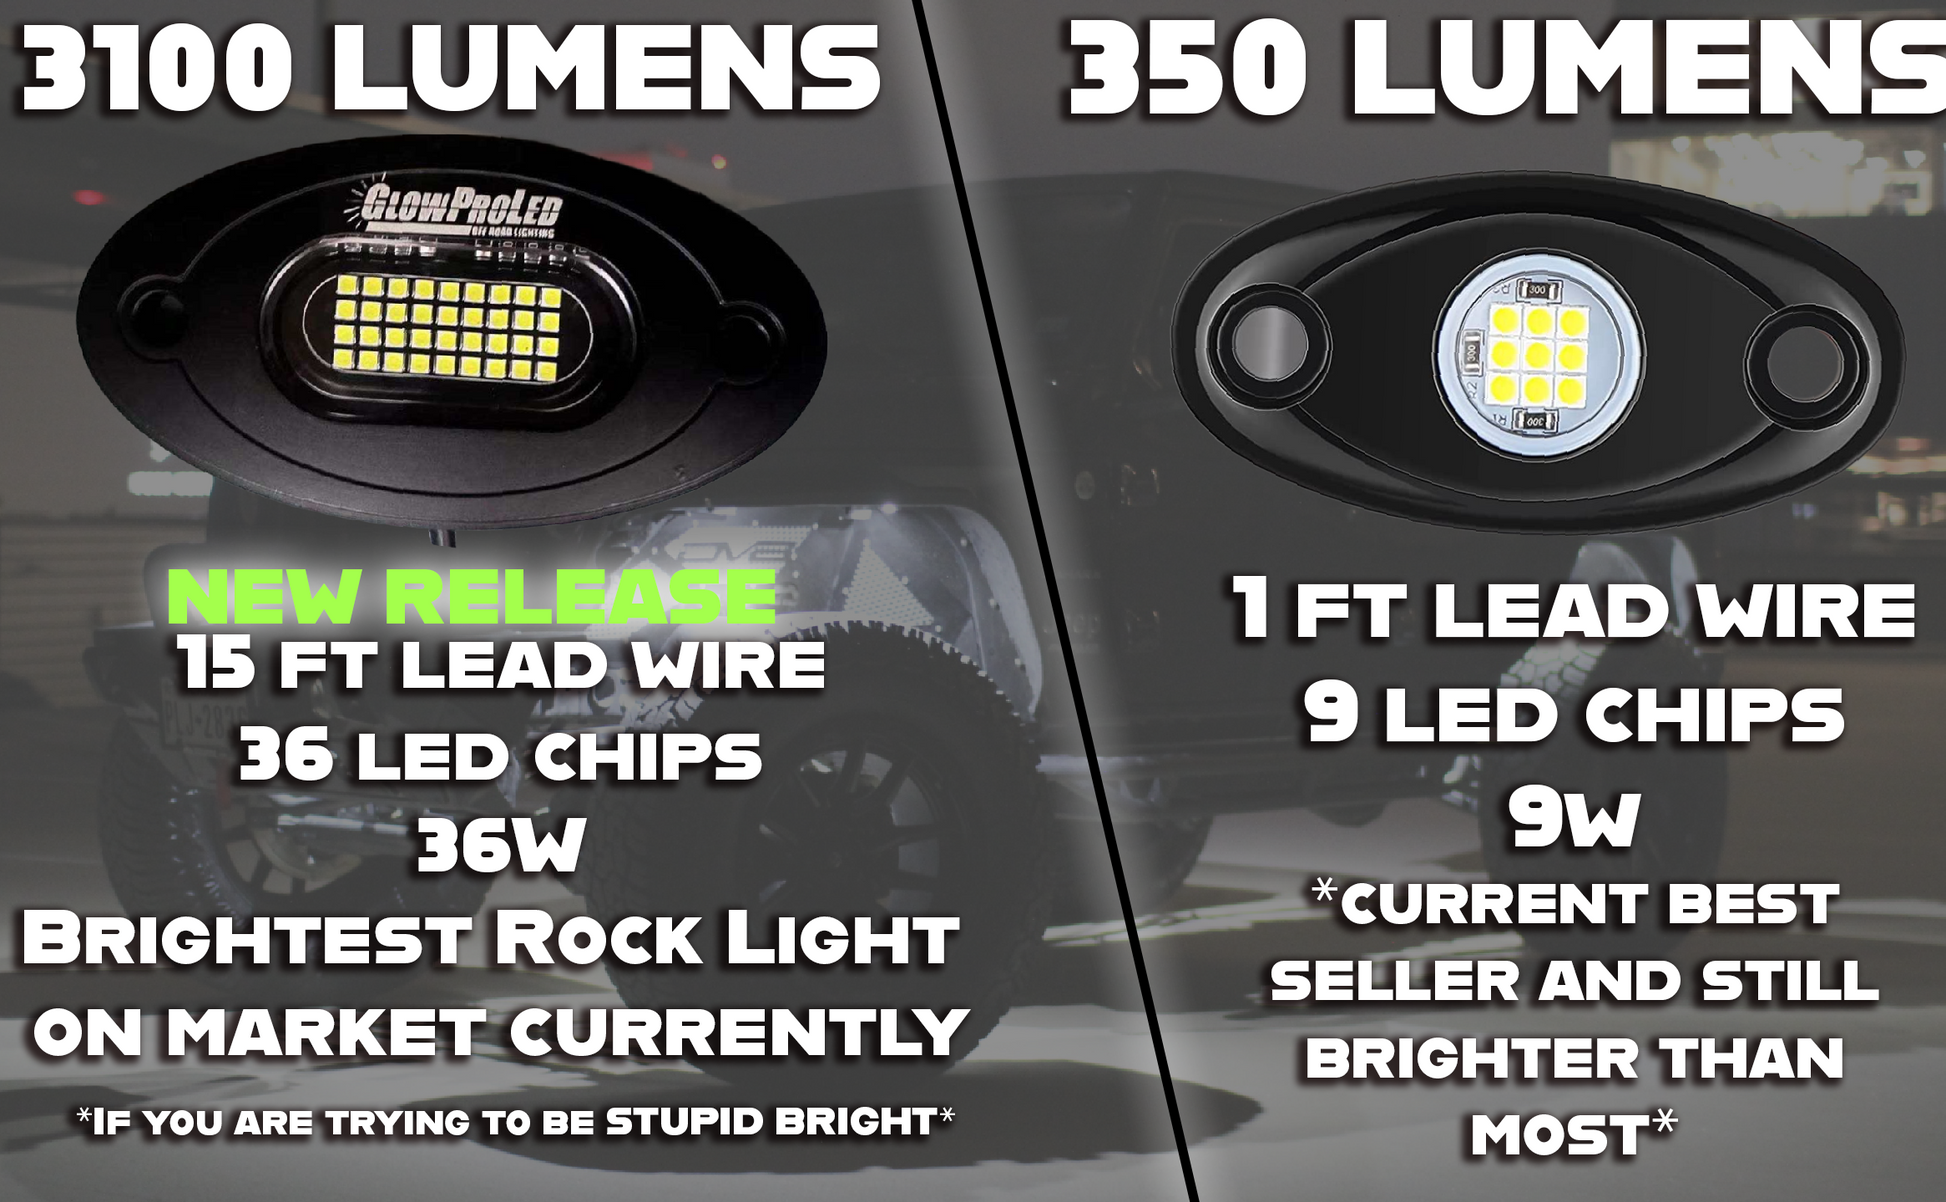 104 Led Pure White Rock Lights (The brightest on the market) – MidsouthLED